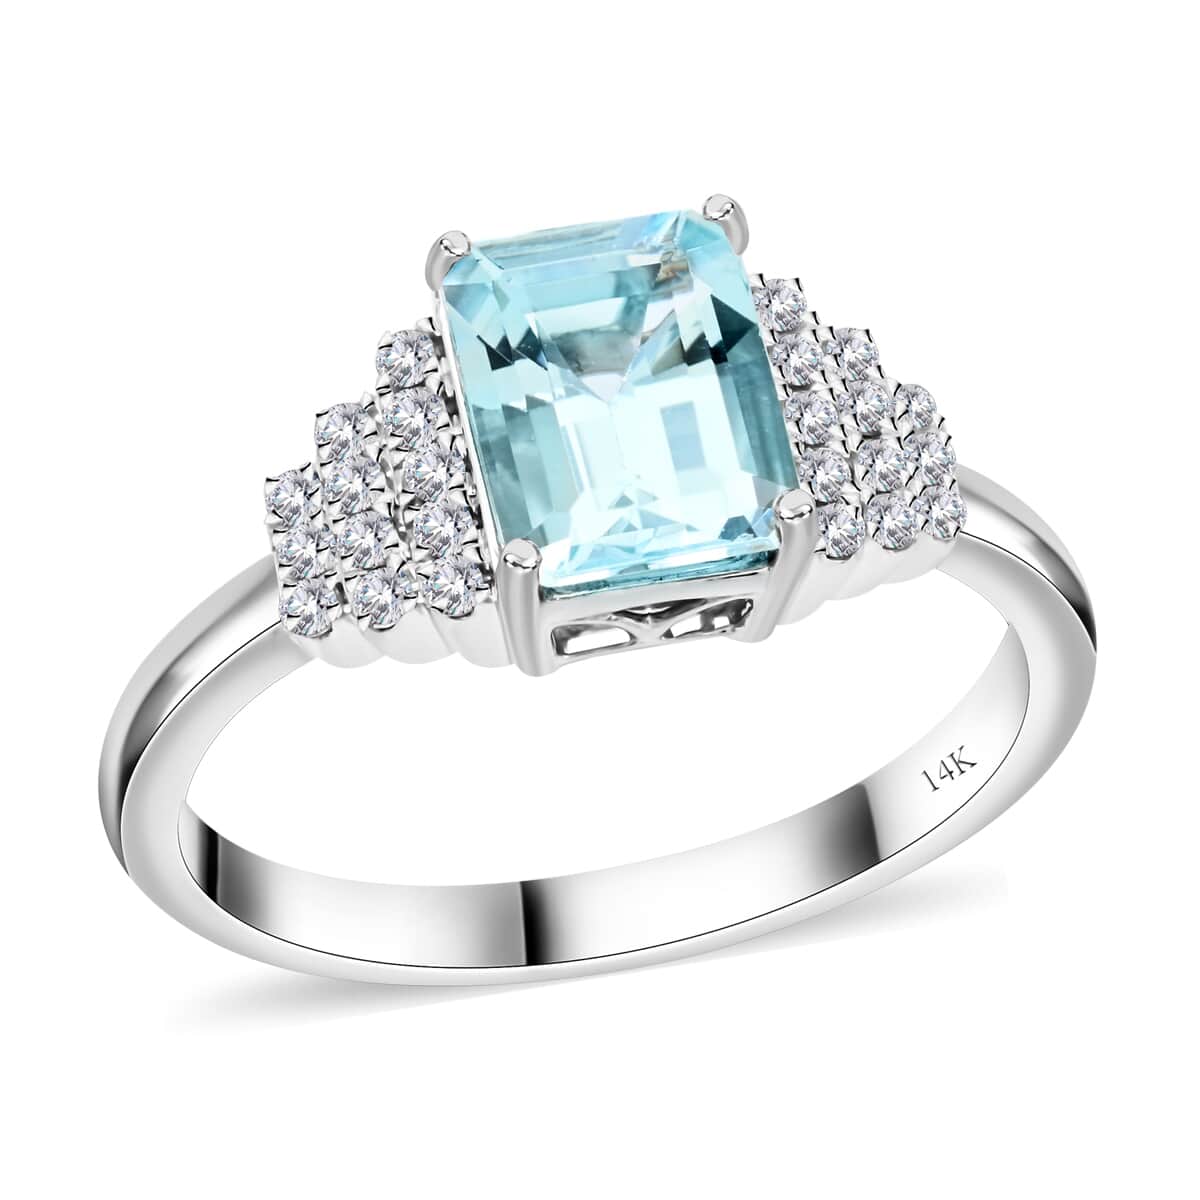 Certified & Appraised Luxoro 14K White Gold AAA Santa Maria Aquamarine, Diamond (G-H, I2) (0.20 cts) Ring (Size 10.0) (Del. in 10-12 Days) 1.85 ctw image number 0